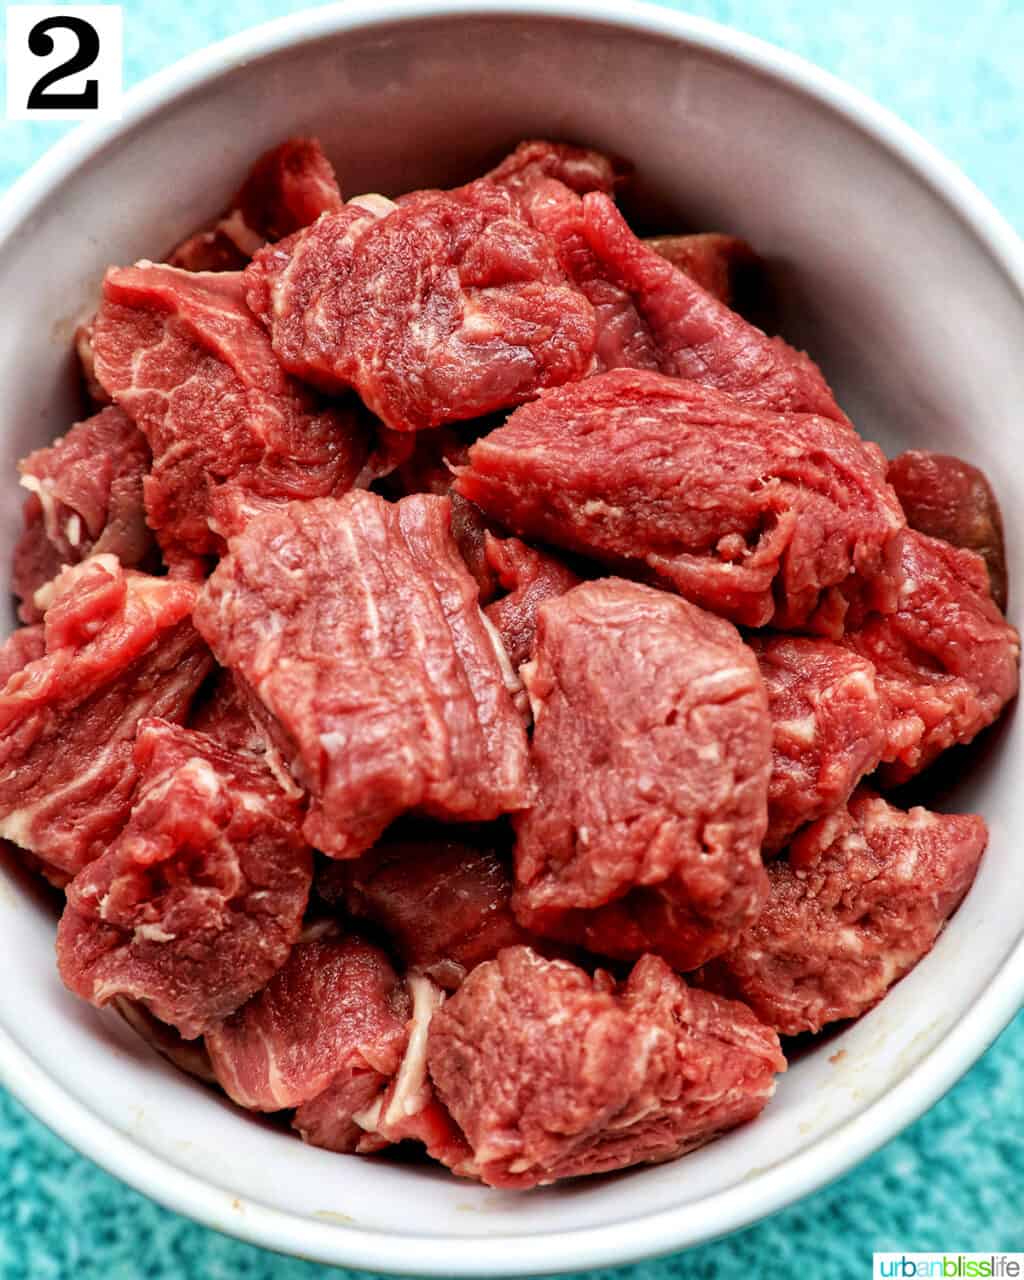 raw steak bites chopped and placed in a white bowl.